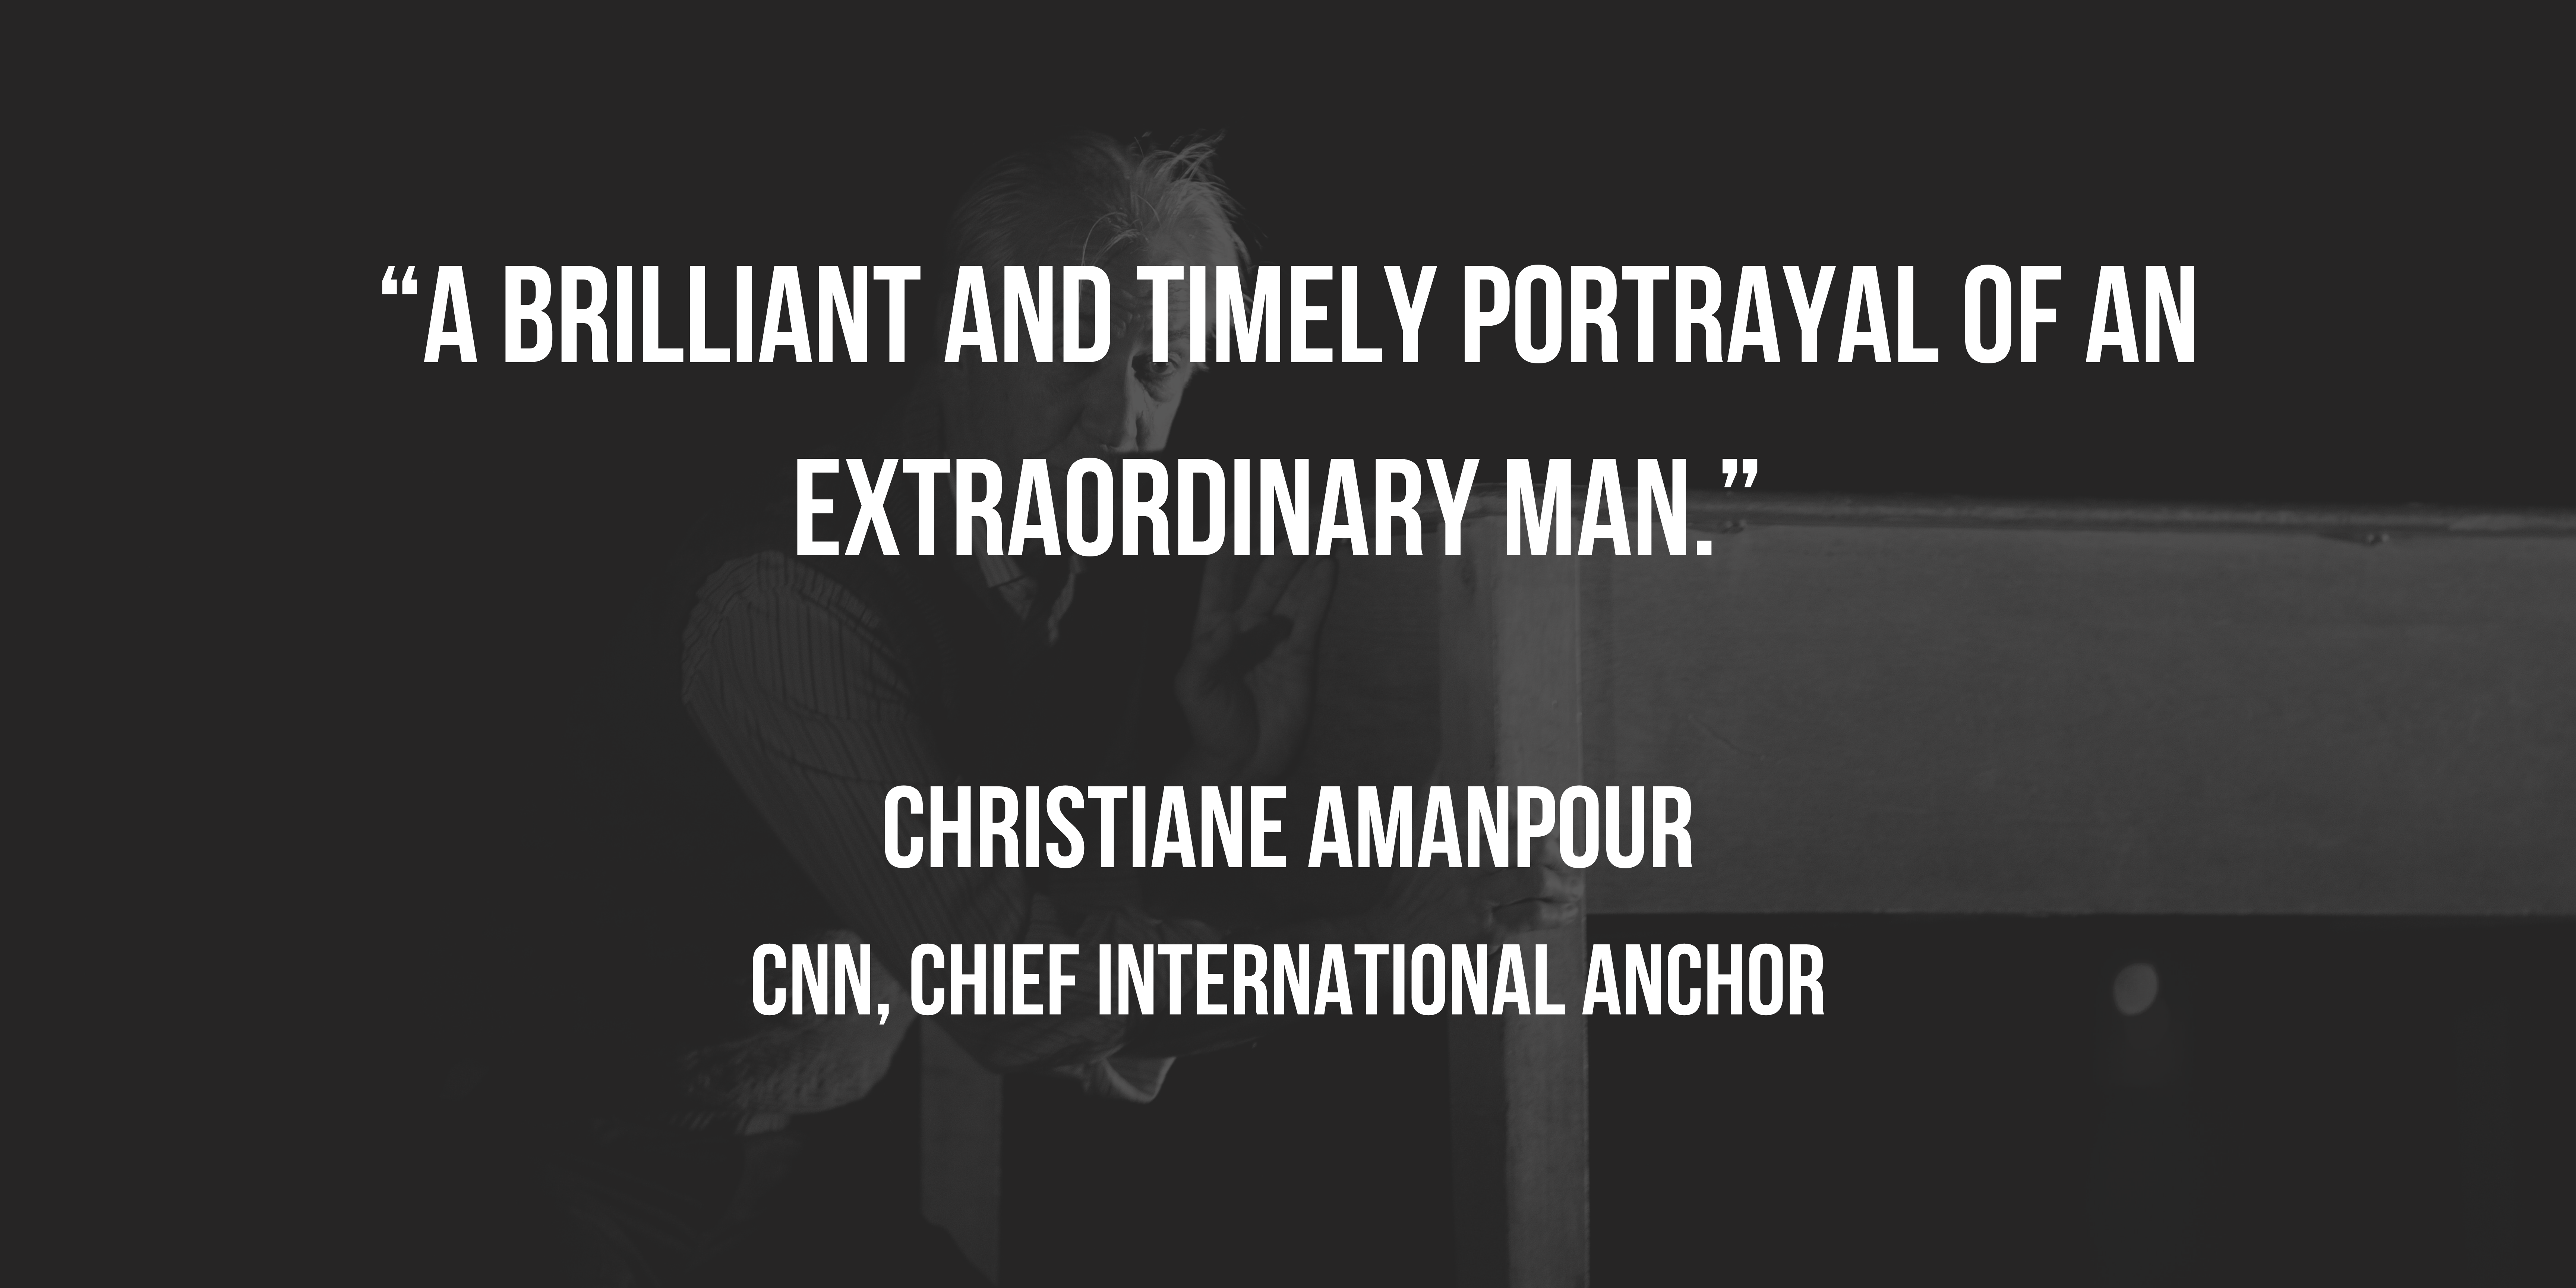 Quote by Christiane Amanpour